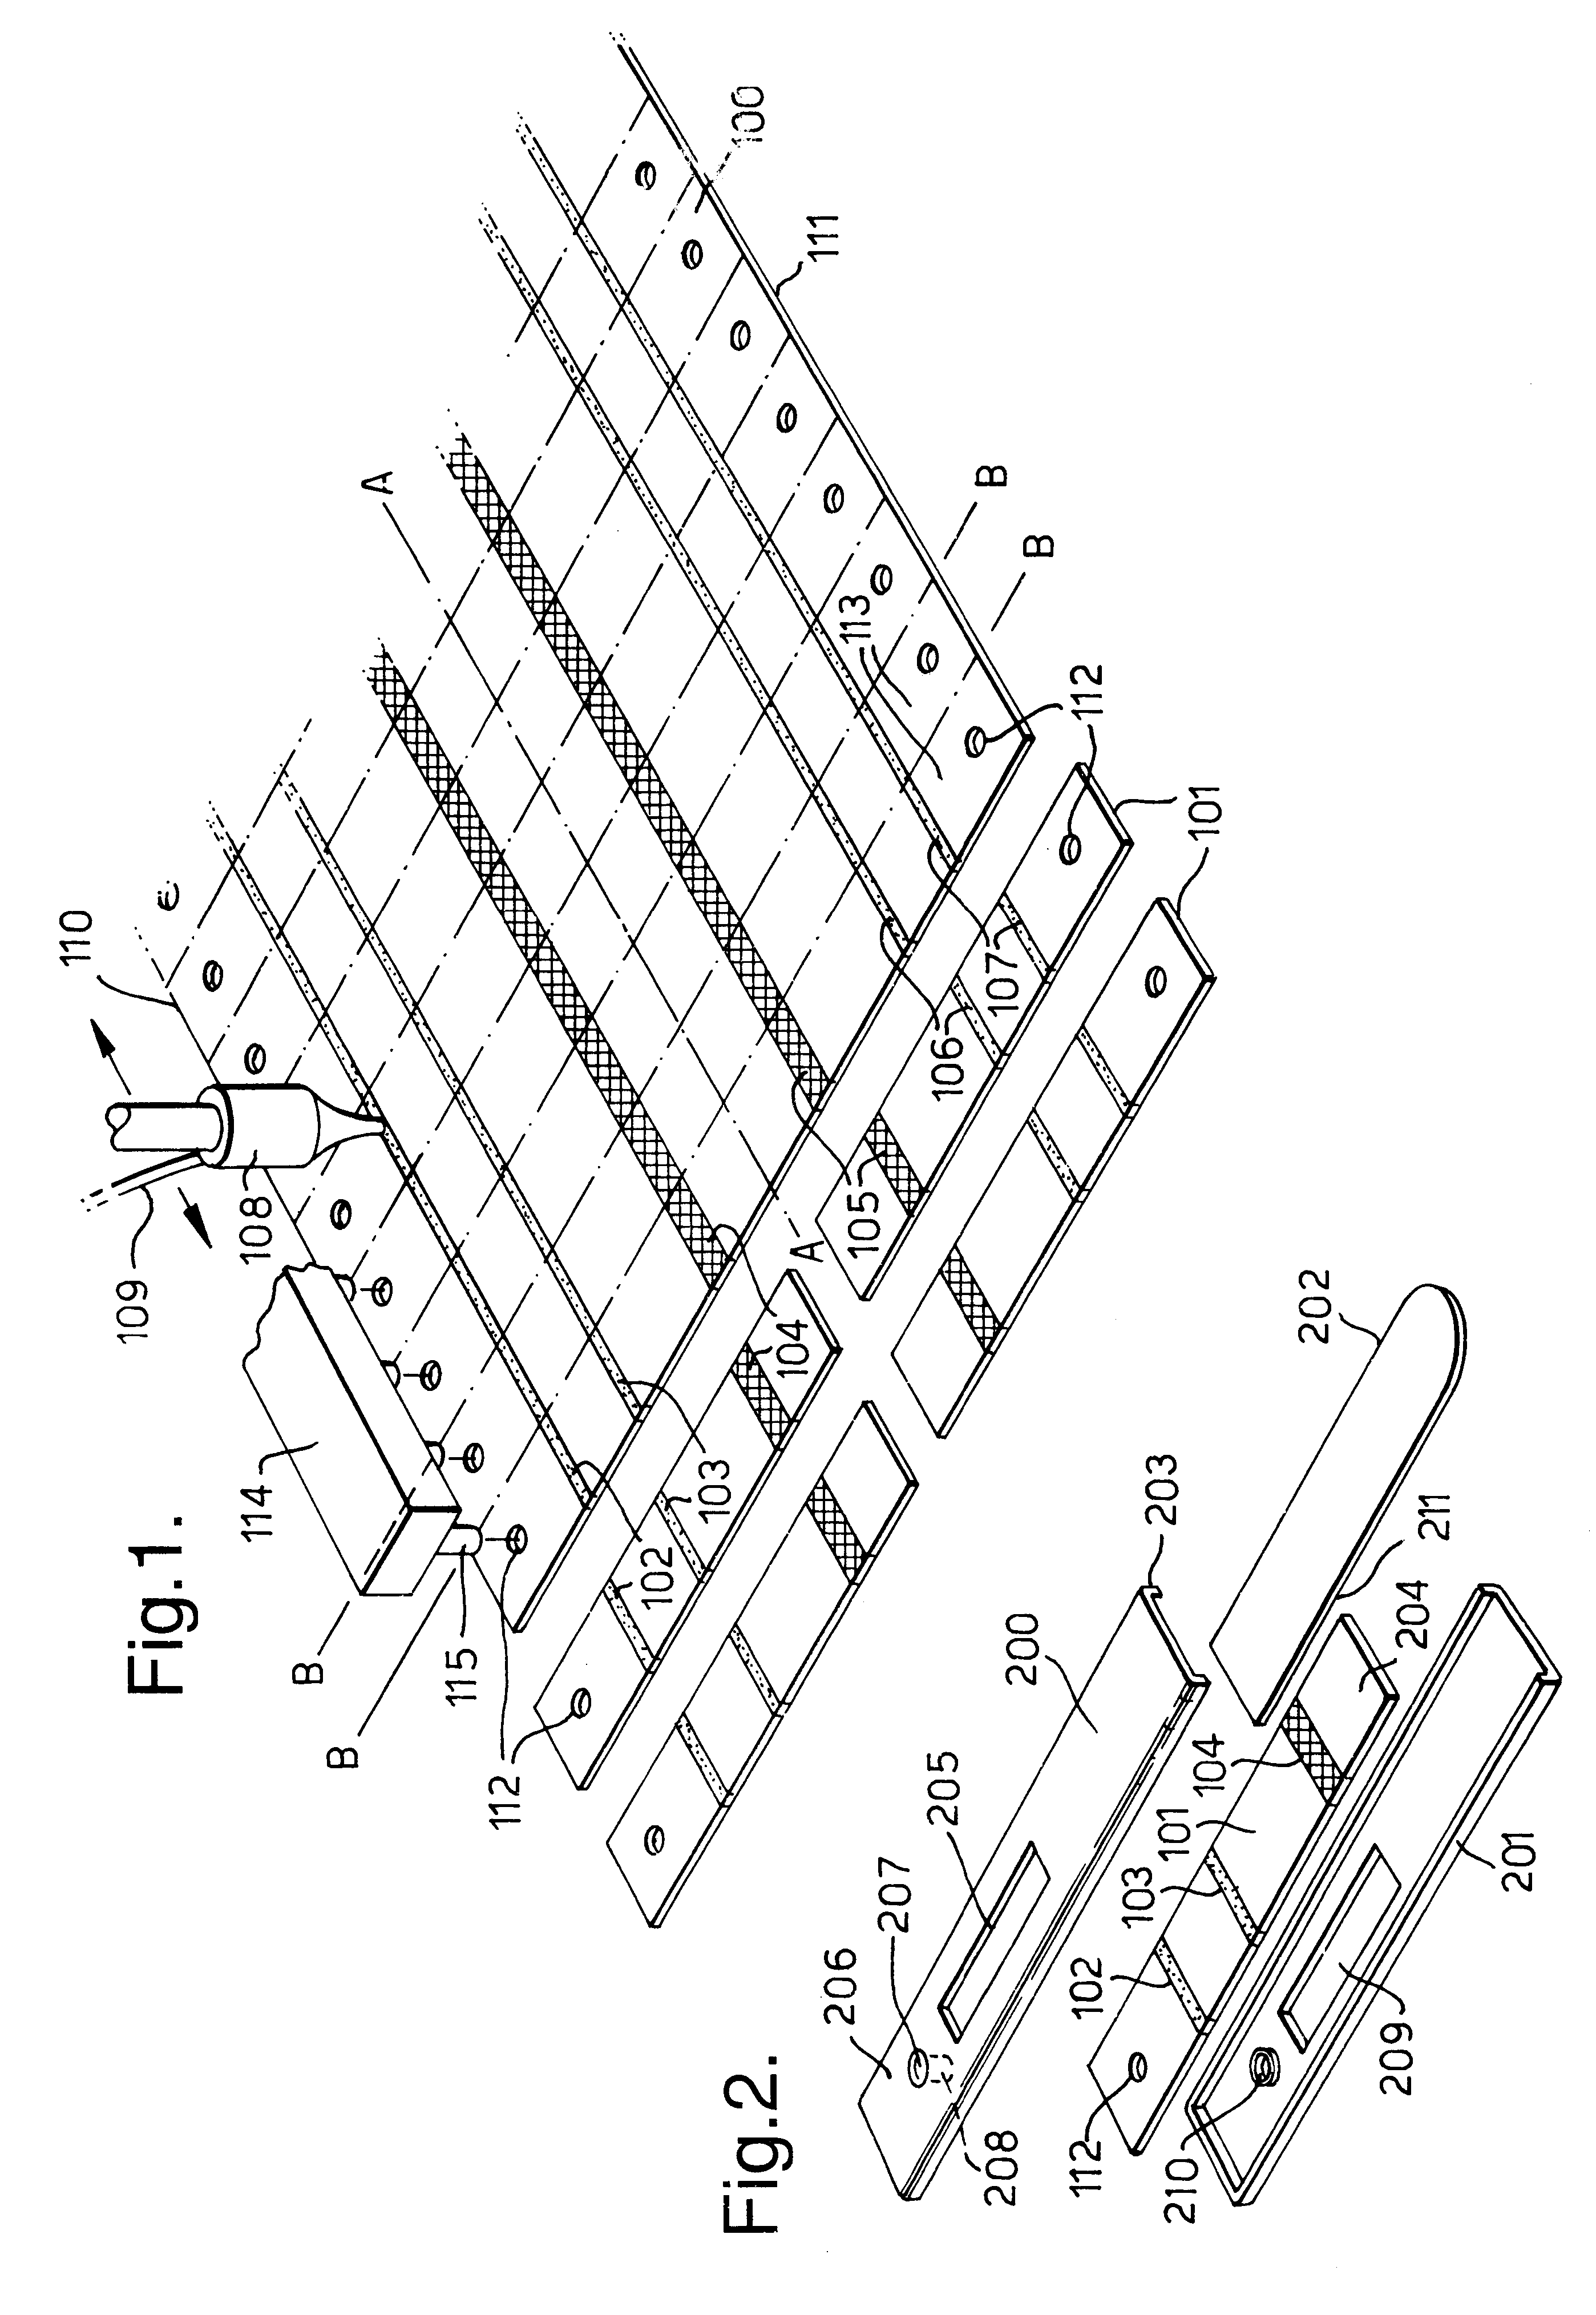 Reading devices and assay devices for use therewith